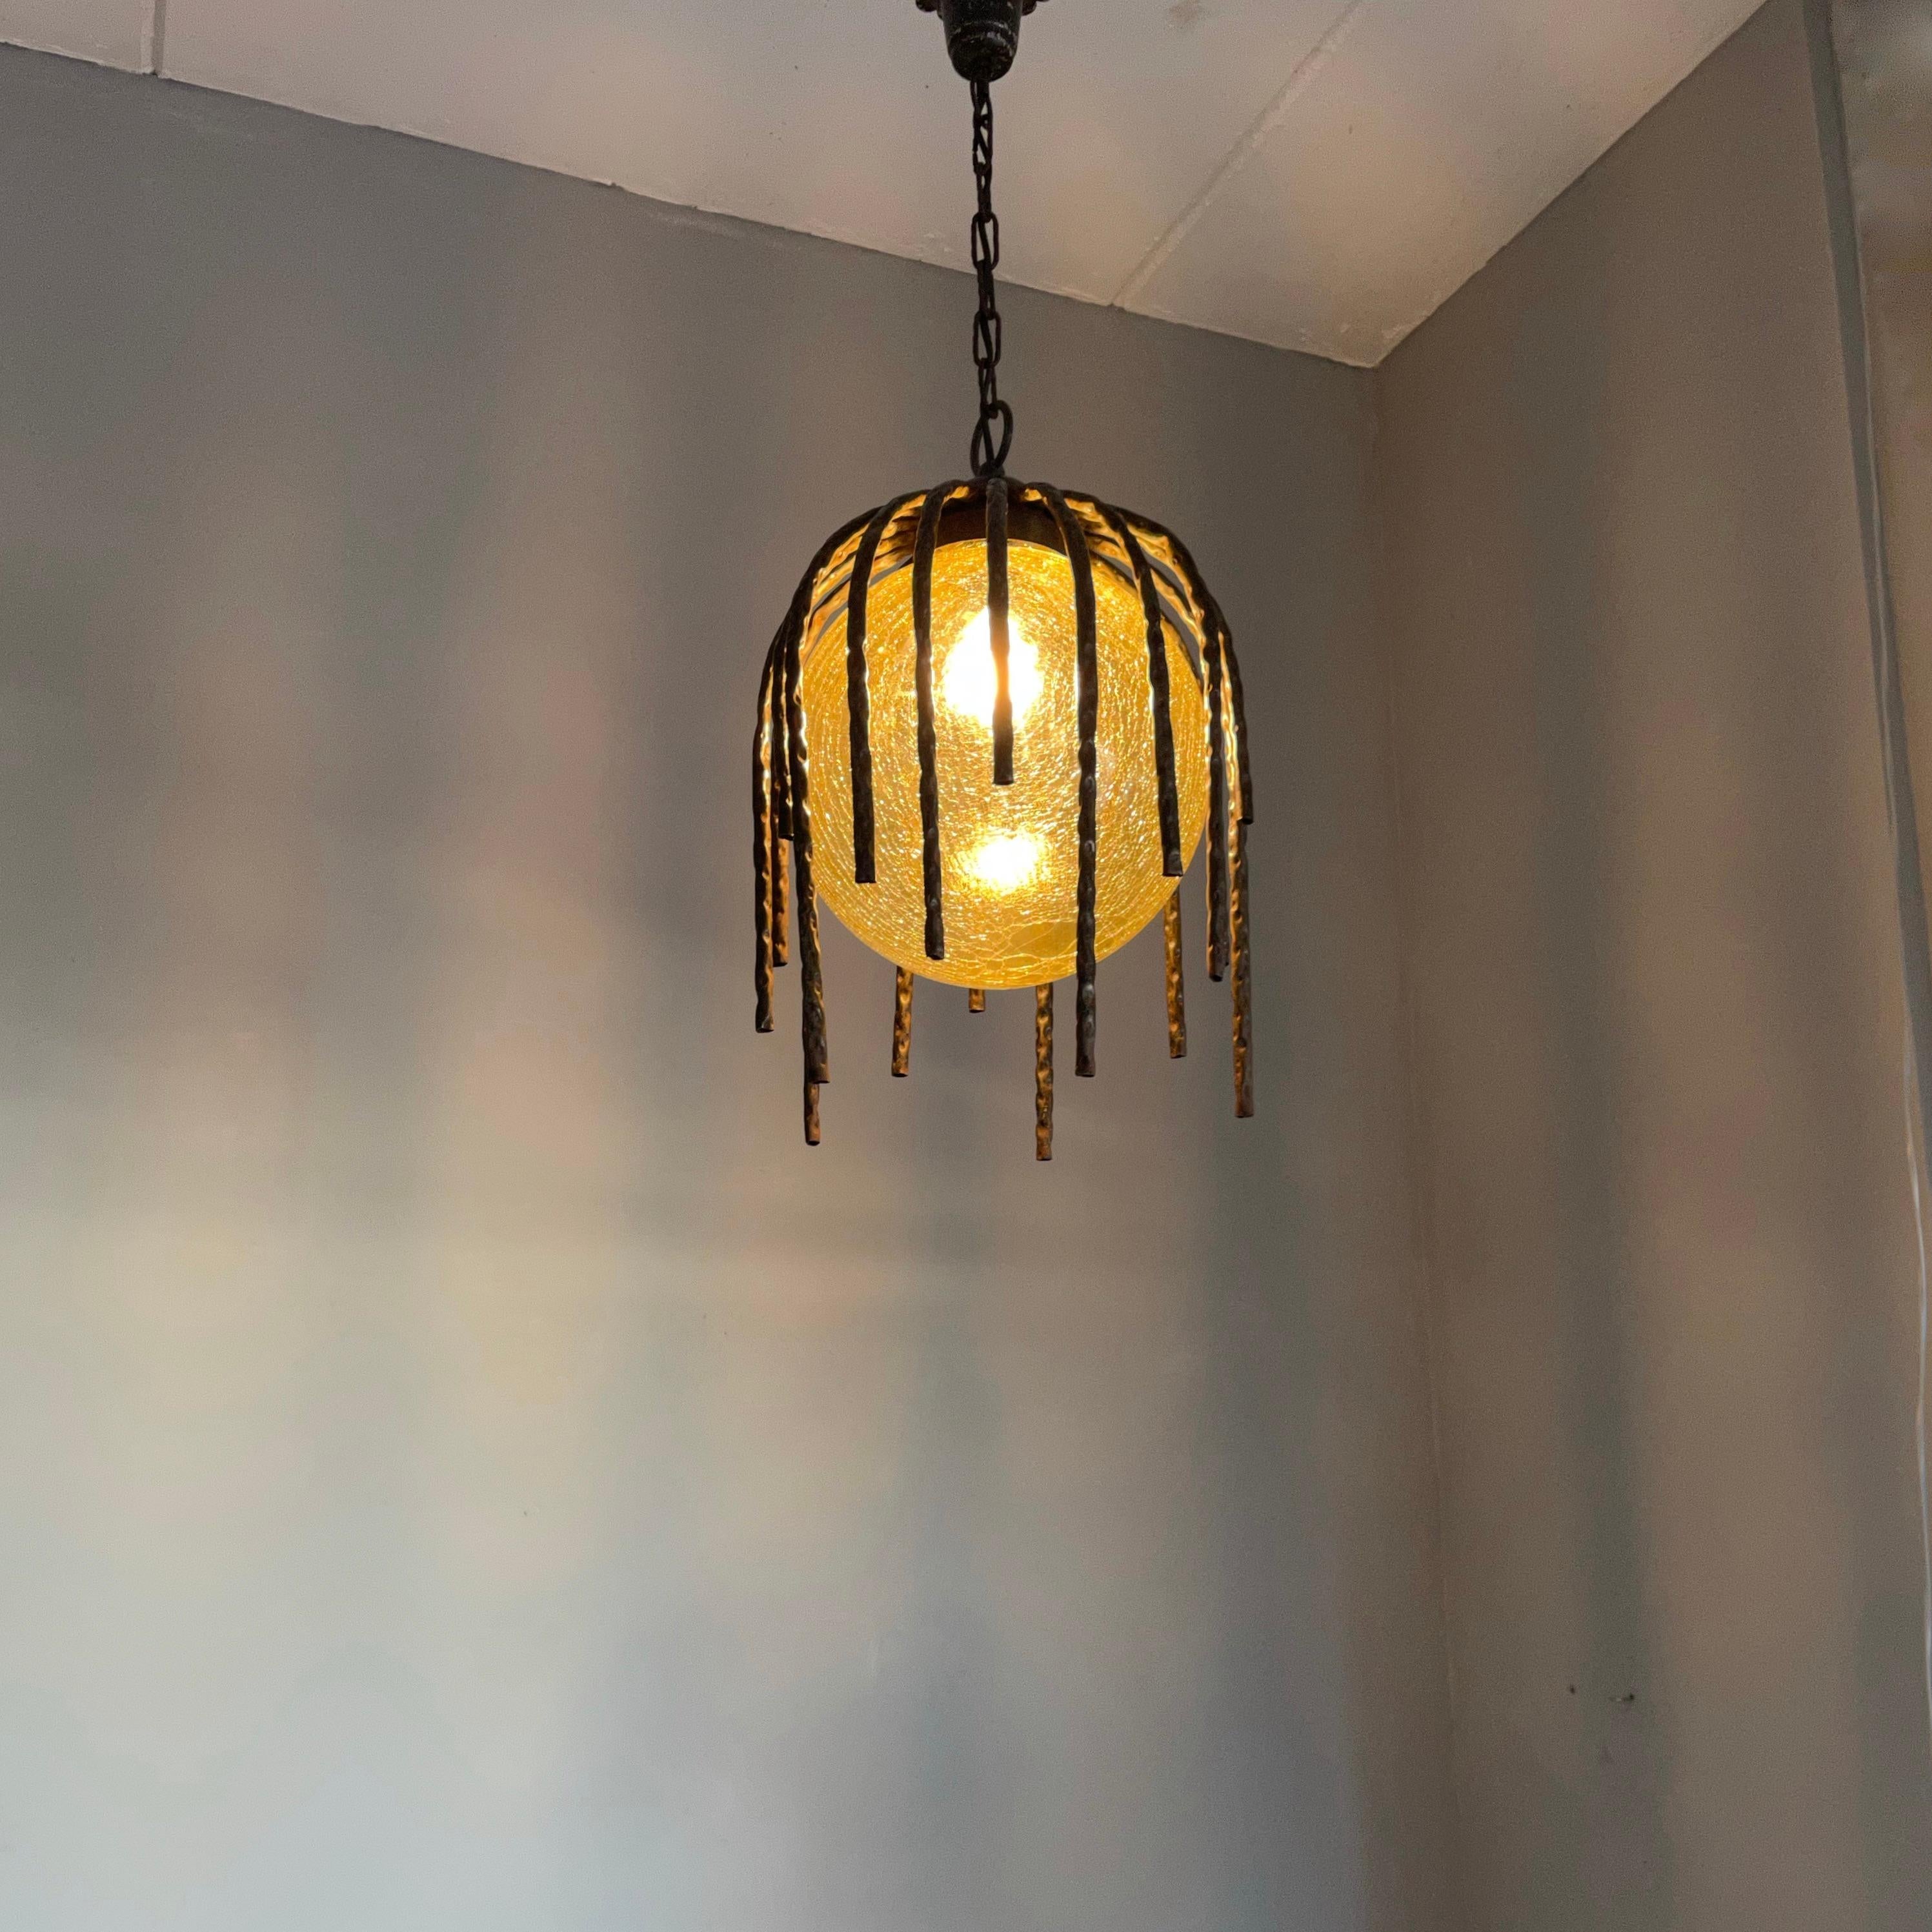 Mid-Century Modern Large and Striking, Midcentury Crackled Amber Glass in Iron Frame Pendant Light For Sale